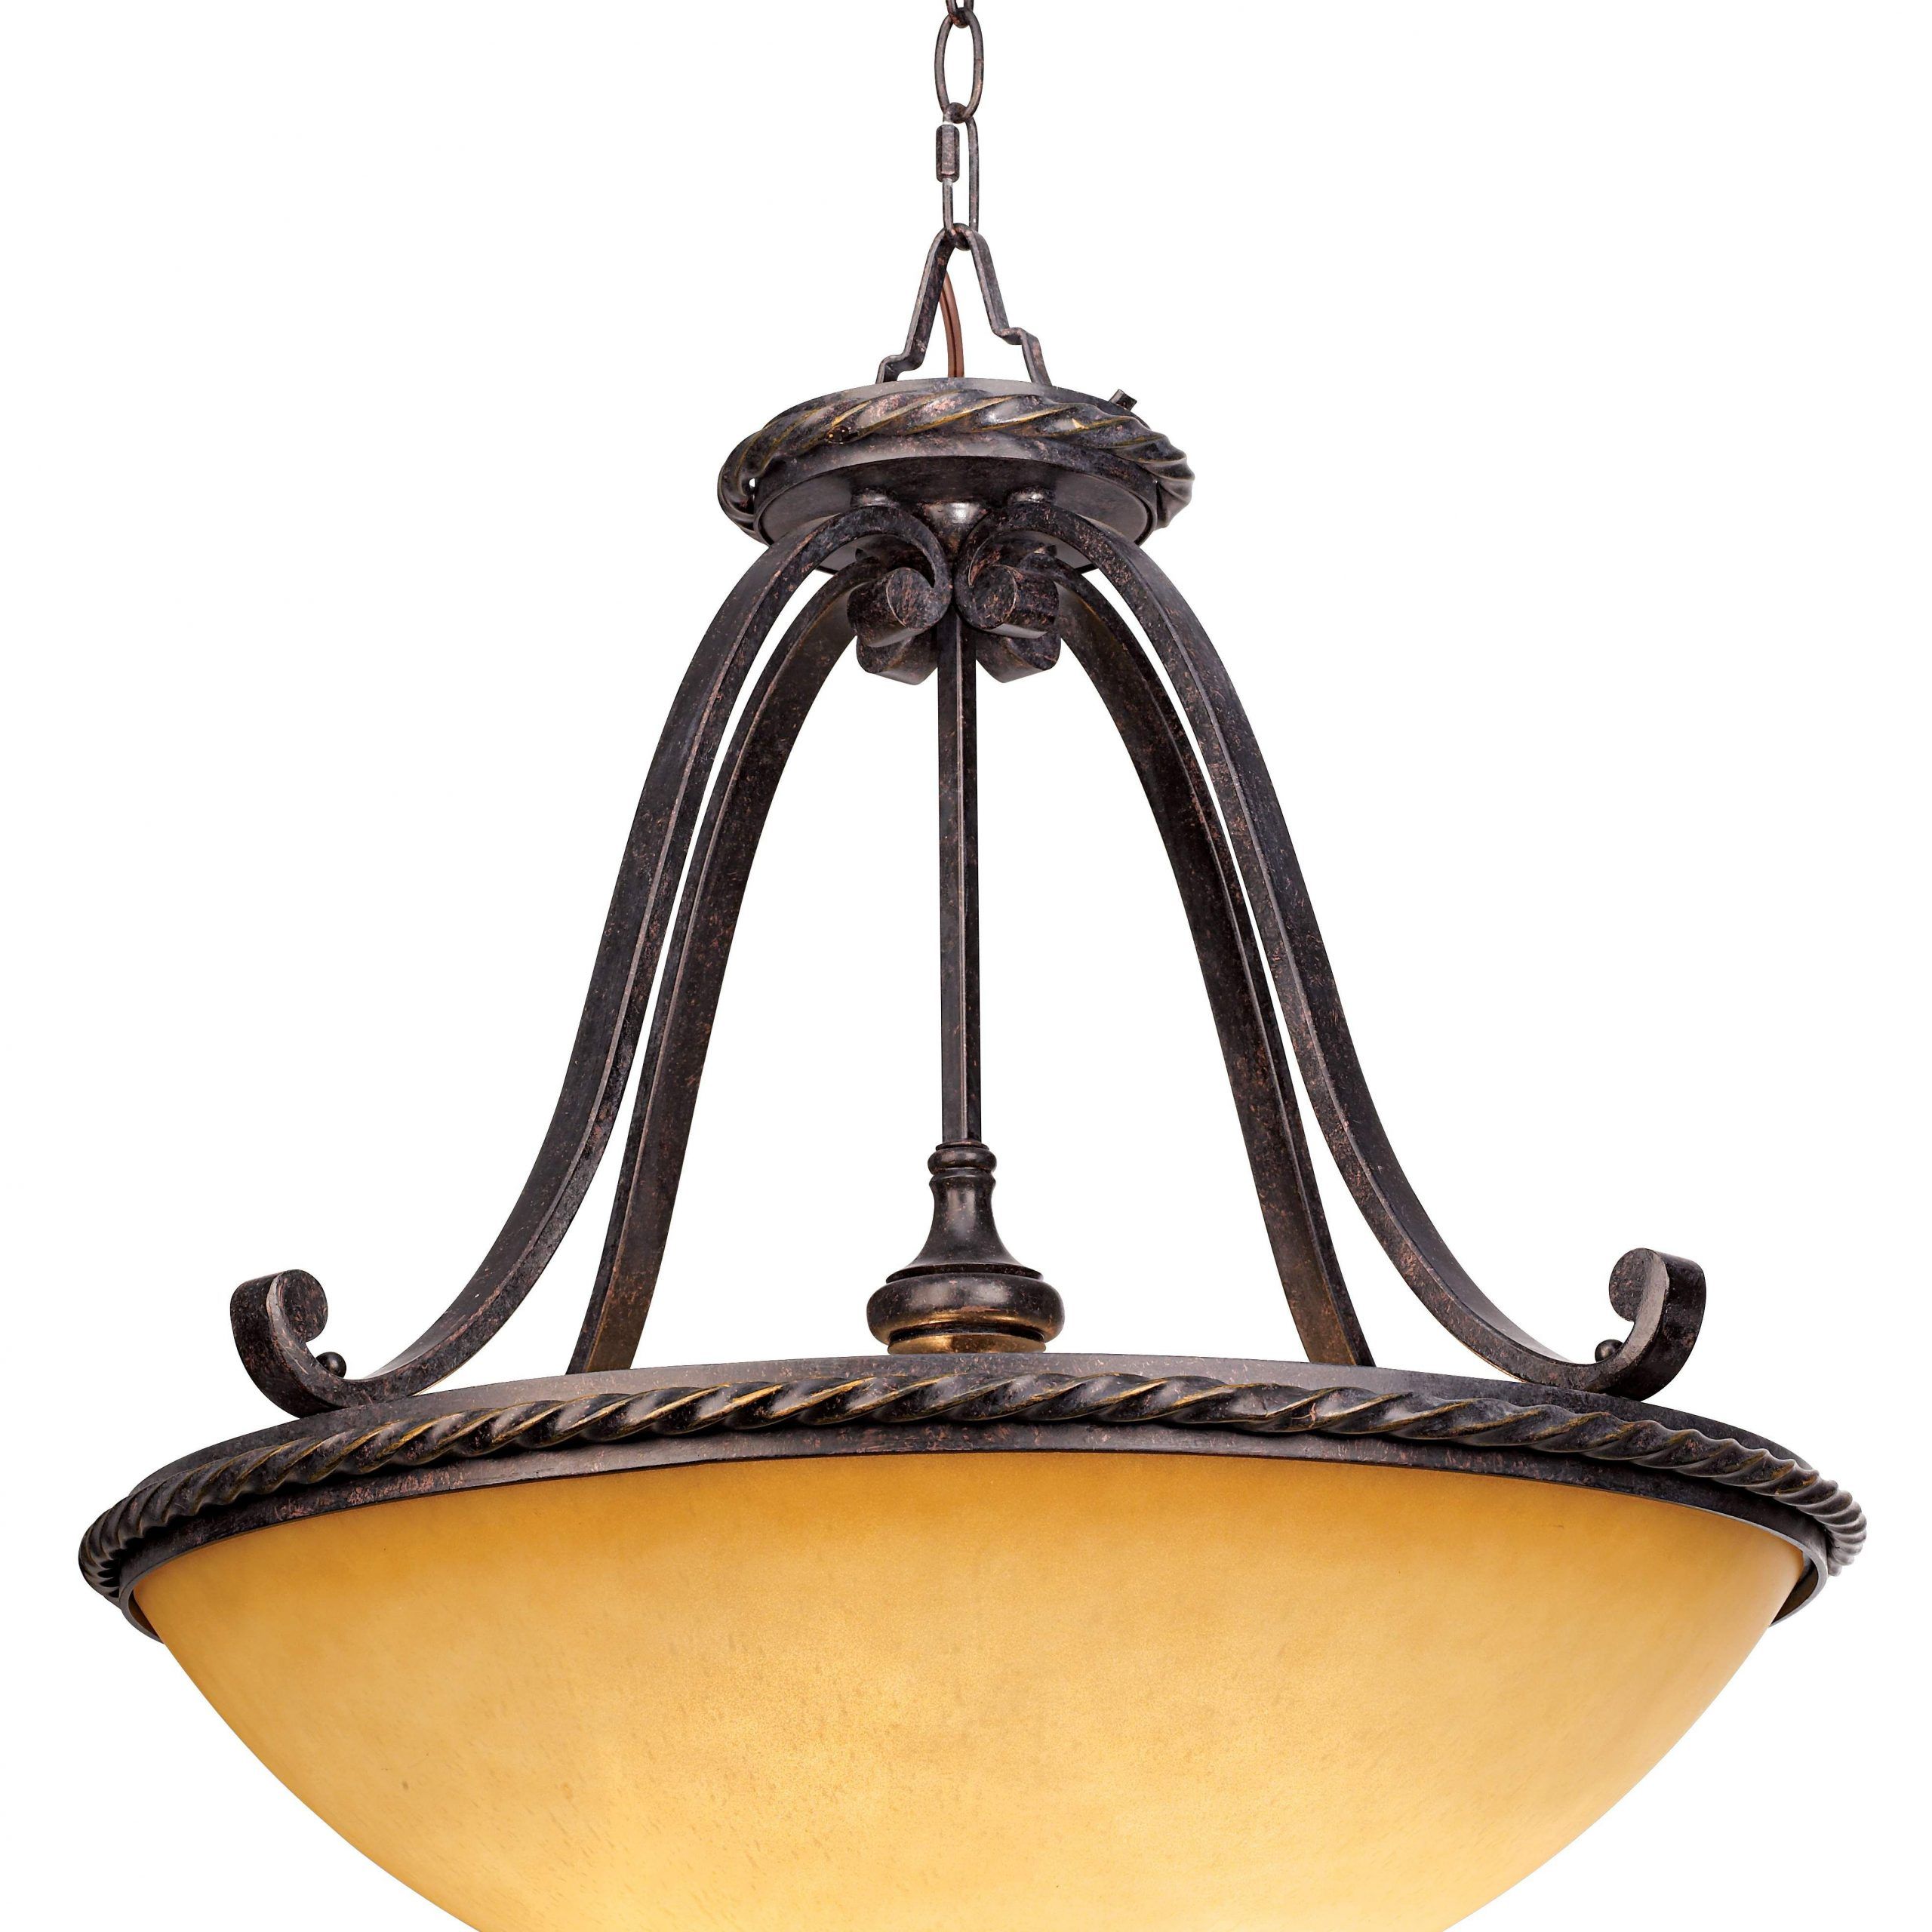 Amber Scavo Glass 22" Wide 3 Light Bowl Pendant Light With Popular Bronze With Clear Glass Pendant Lights (View 3 of 15)